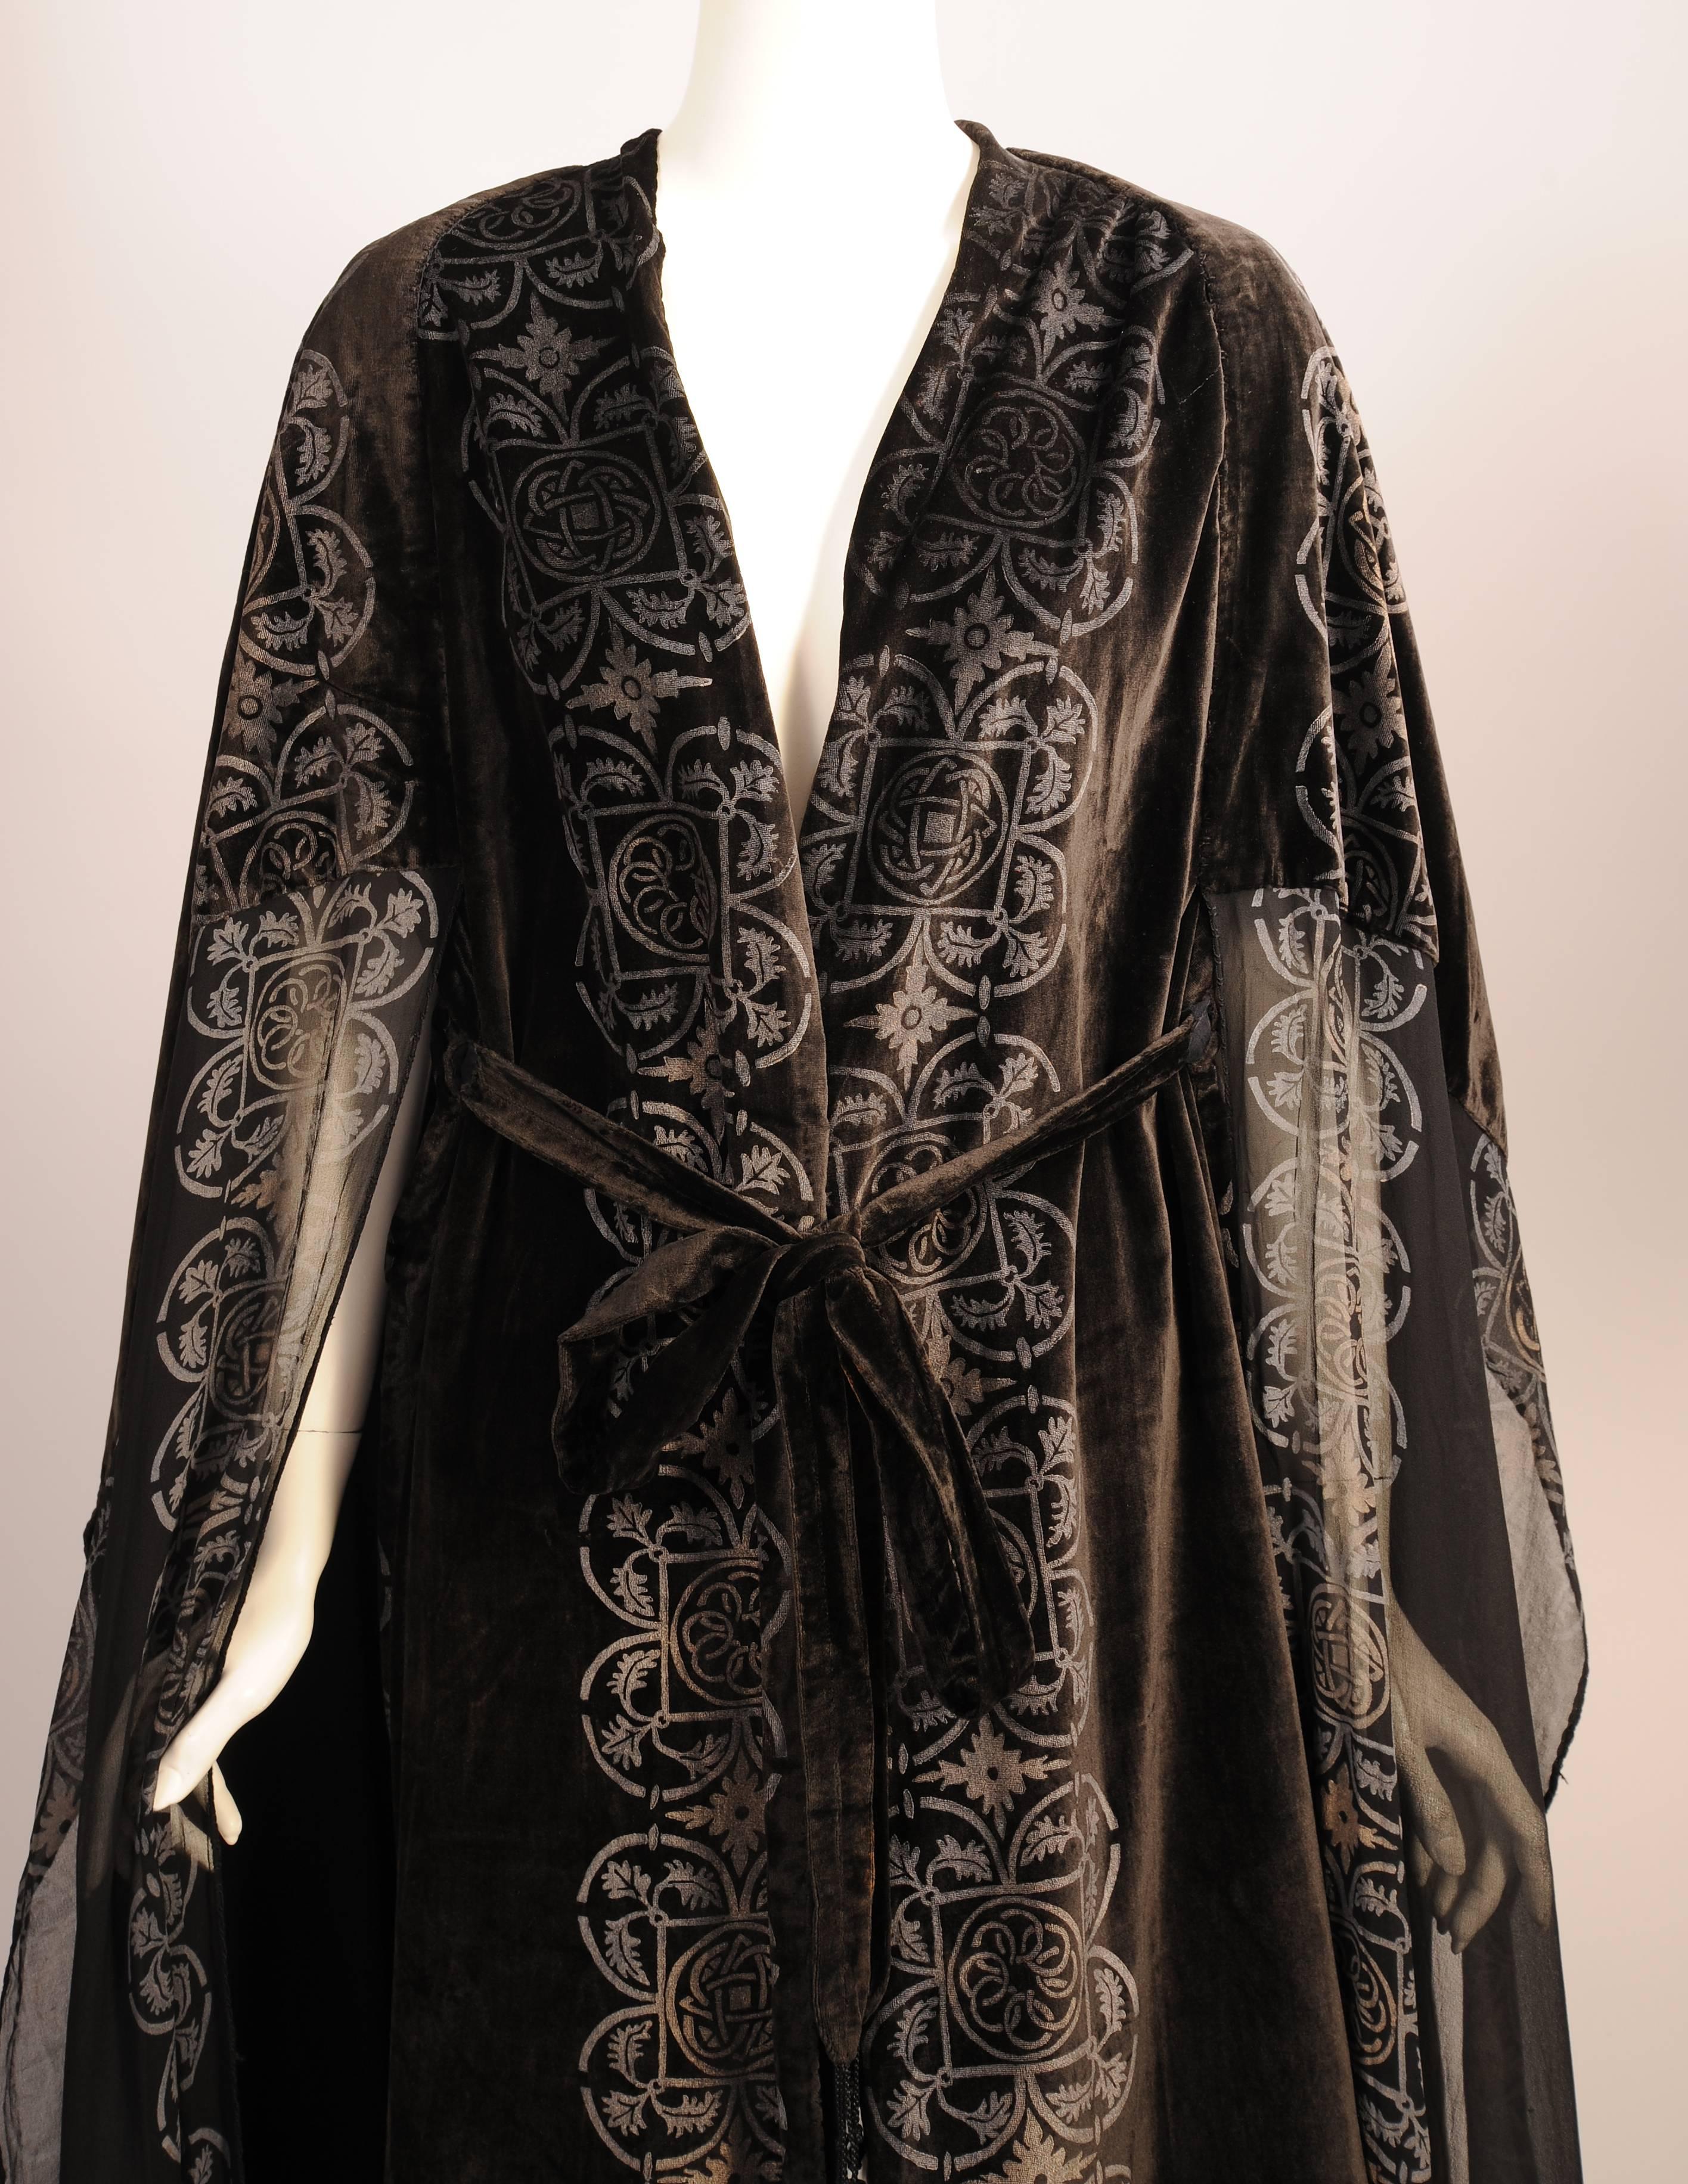 This elegant piece comes from the wardrobe of Margaret Draper, the richest girl in New England, who married an Italian Prince and became the Princess Boncampagni.  Black silk velvet is hand stenciled with silver and gold pigment in a quatrefoil